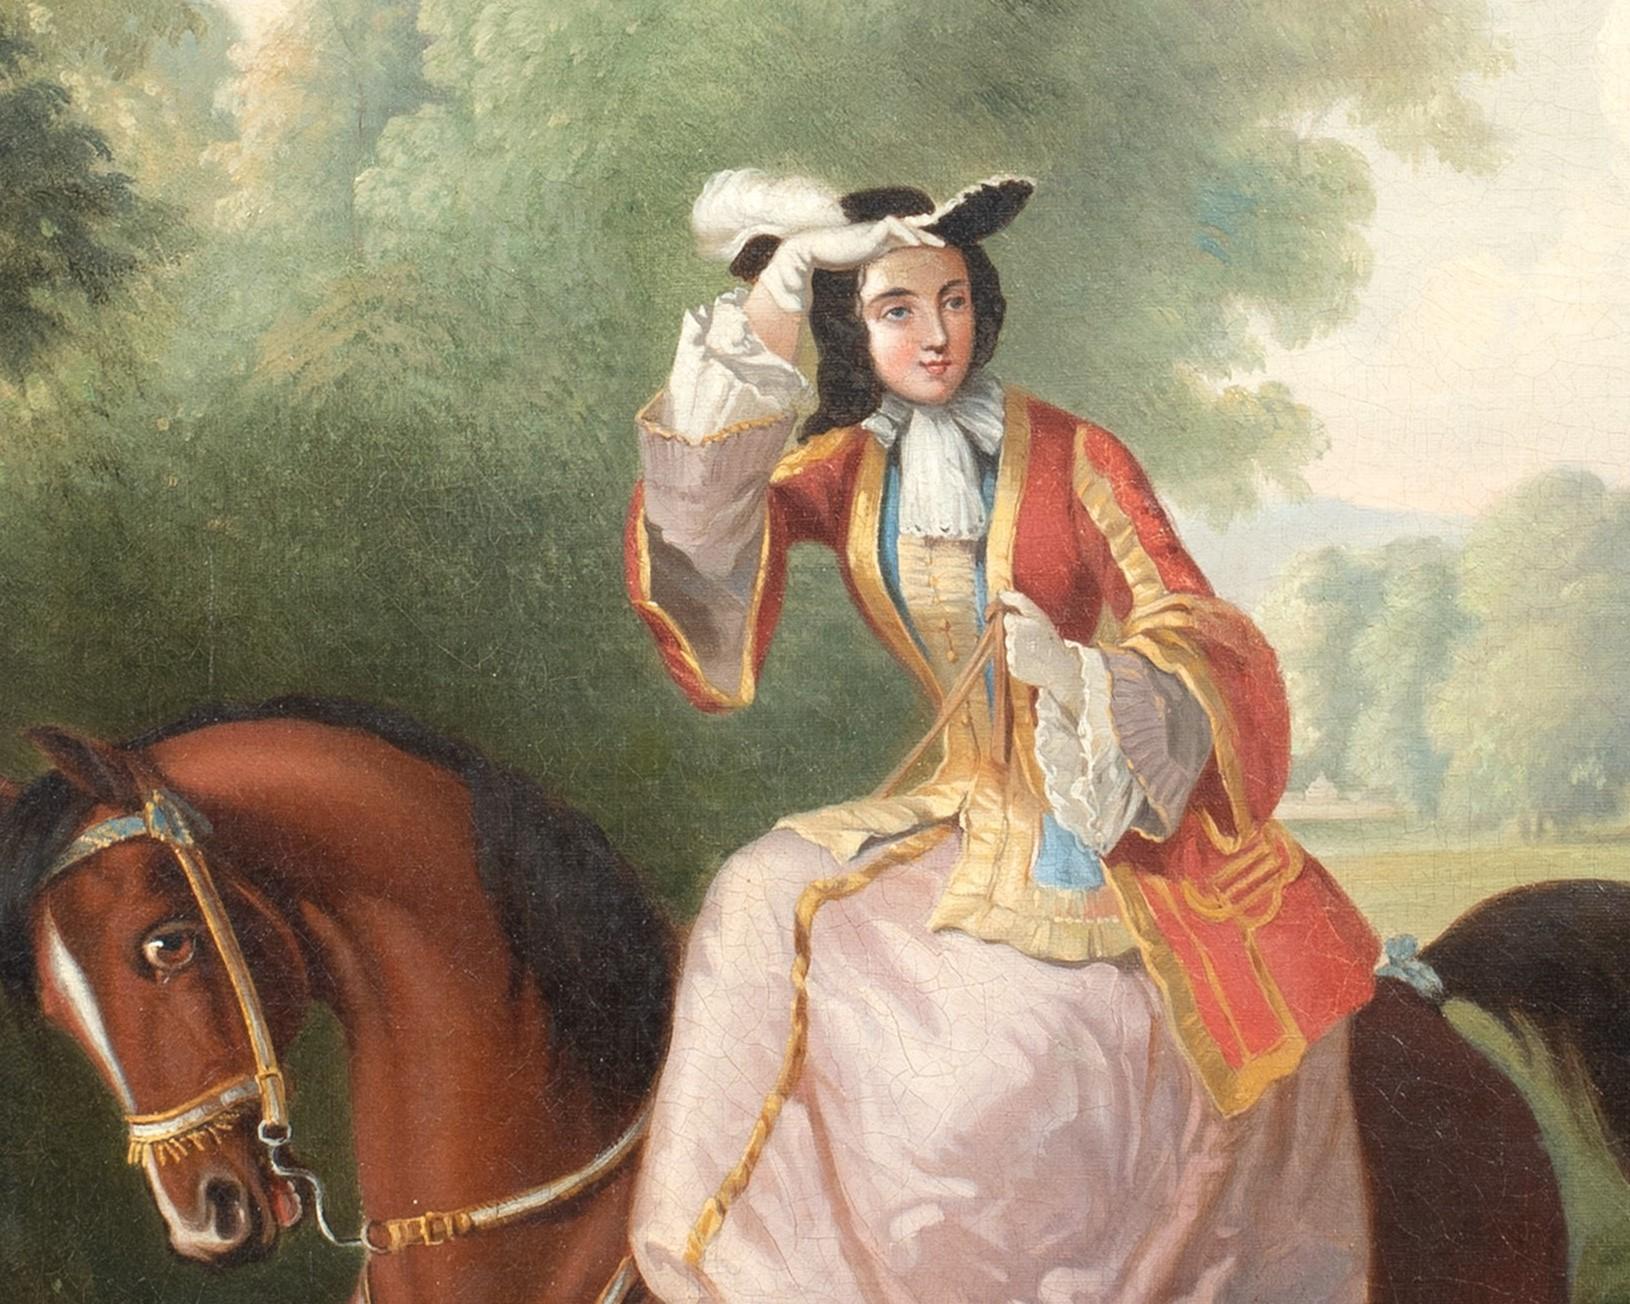 Portrait Of A Lady Riding Sidesaddle, 19th Century - Brown Landscape Painting by Unknown